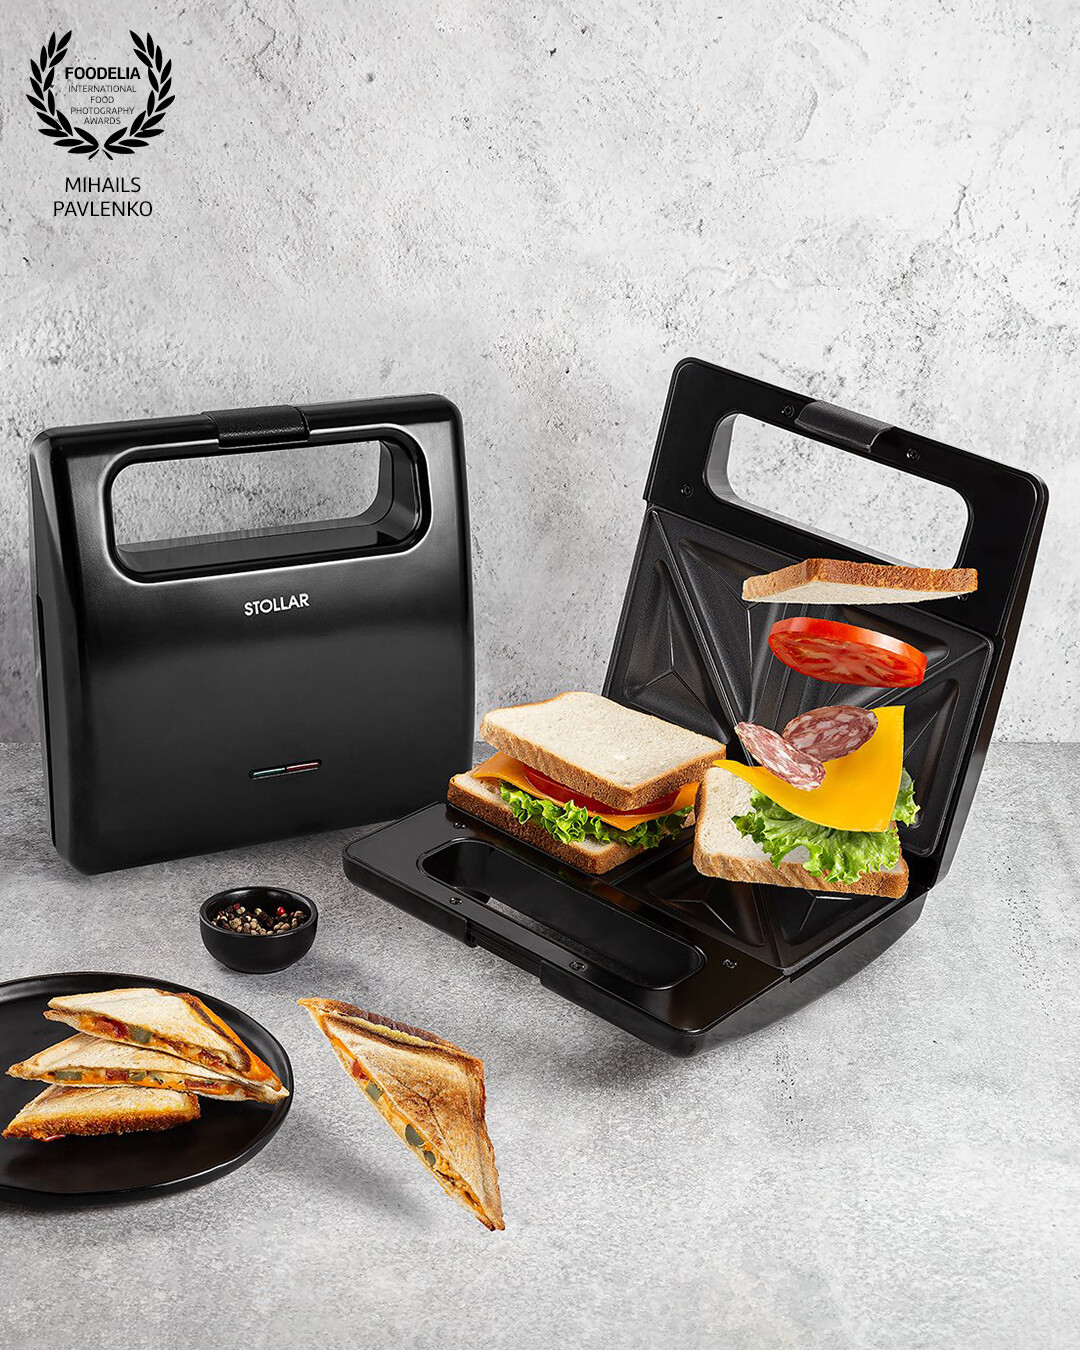 New product of Stollar @stollar_is_now_sage - black sandwich maker.